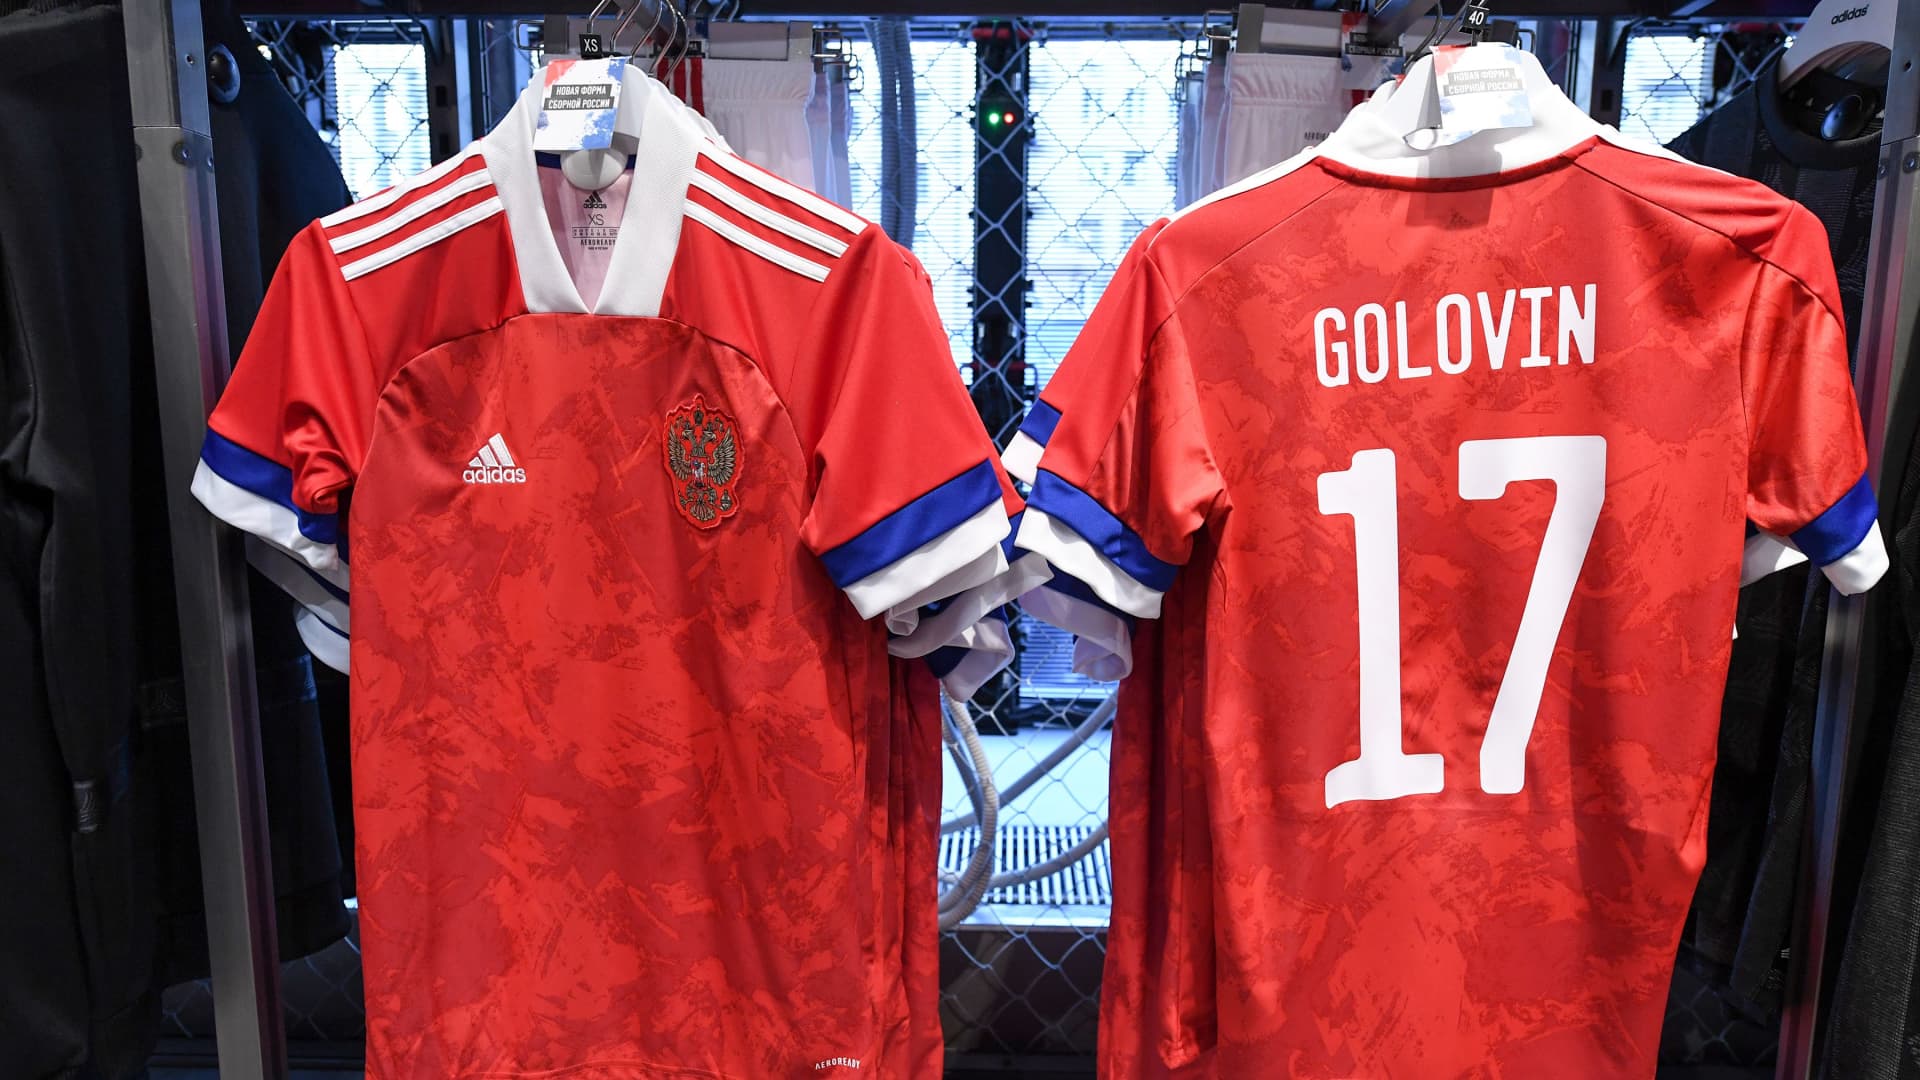 A picture shows the new Adidas-designed jerseys of the Russian national football team at an official Adidas store in Moscow on November 13, 2019.